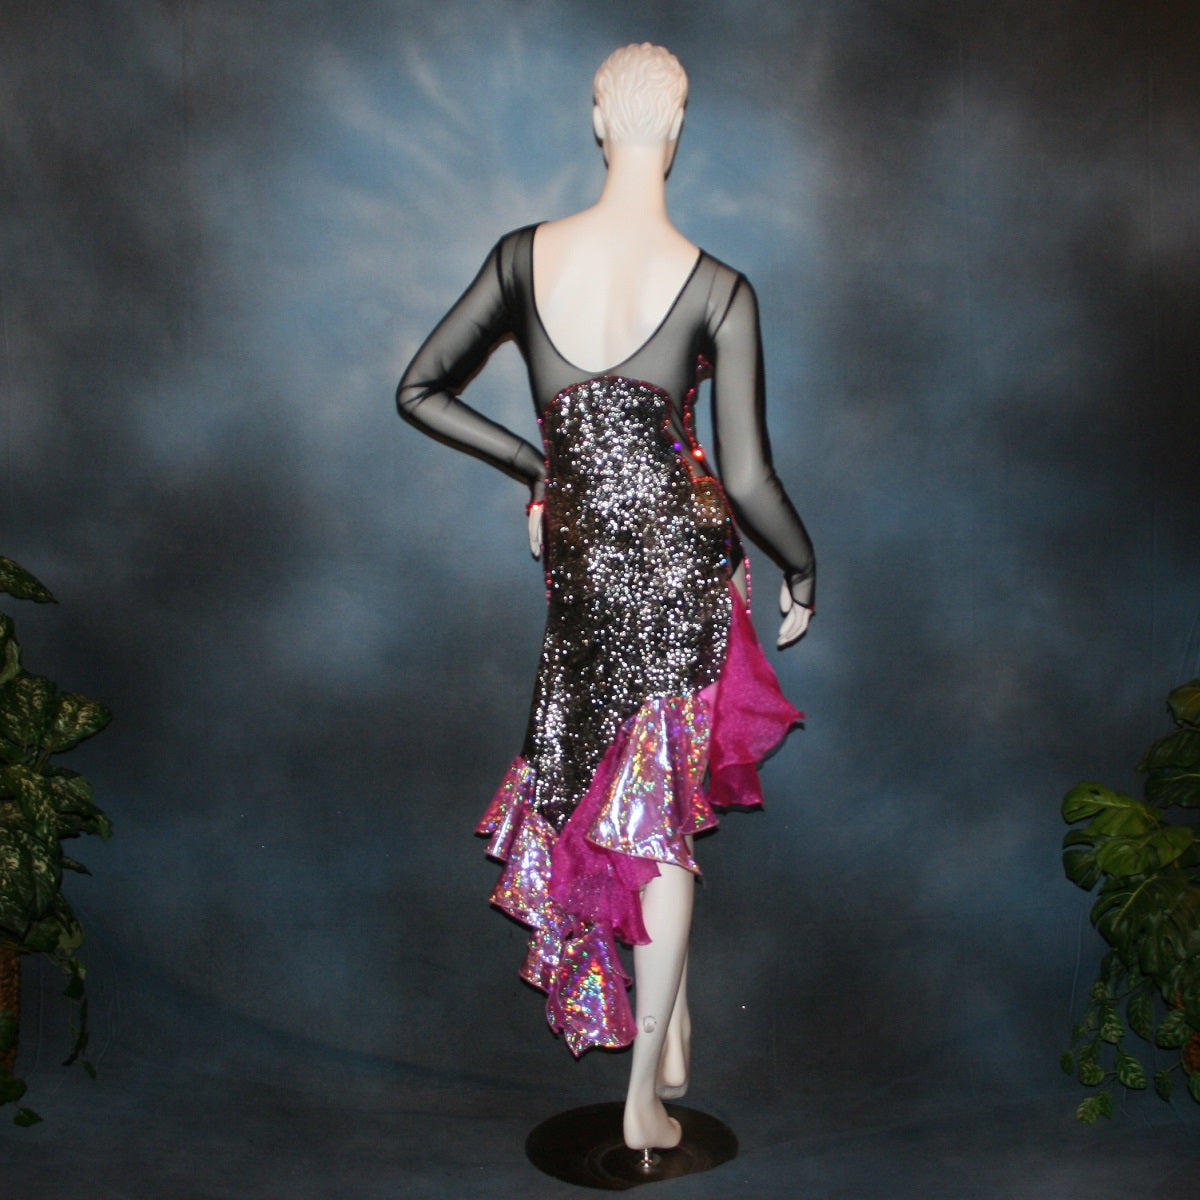 Crystal's Creations back view of Black & silver Latin/rhythm dress with pink accents created of gorgeous silver swirls on black glitter slinky on a sheer stretch mesh base, embellished with pink Swarovski rhinestone work & hand beading